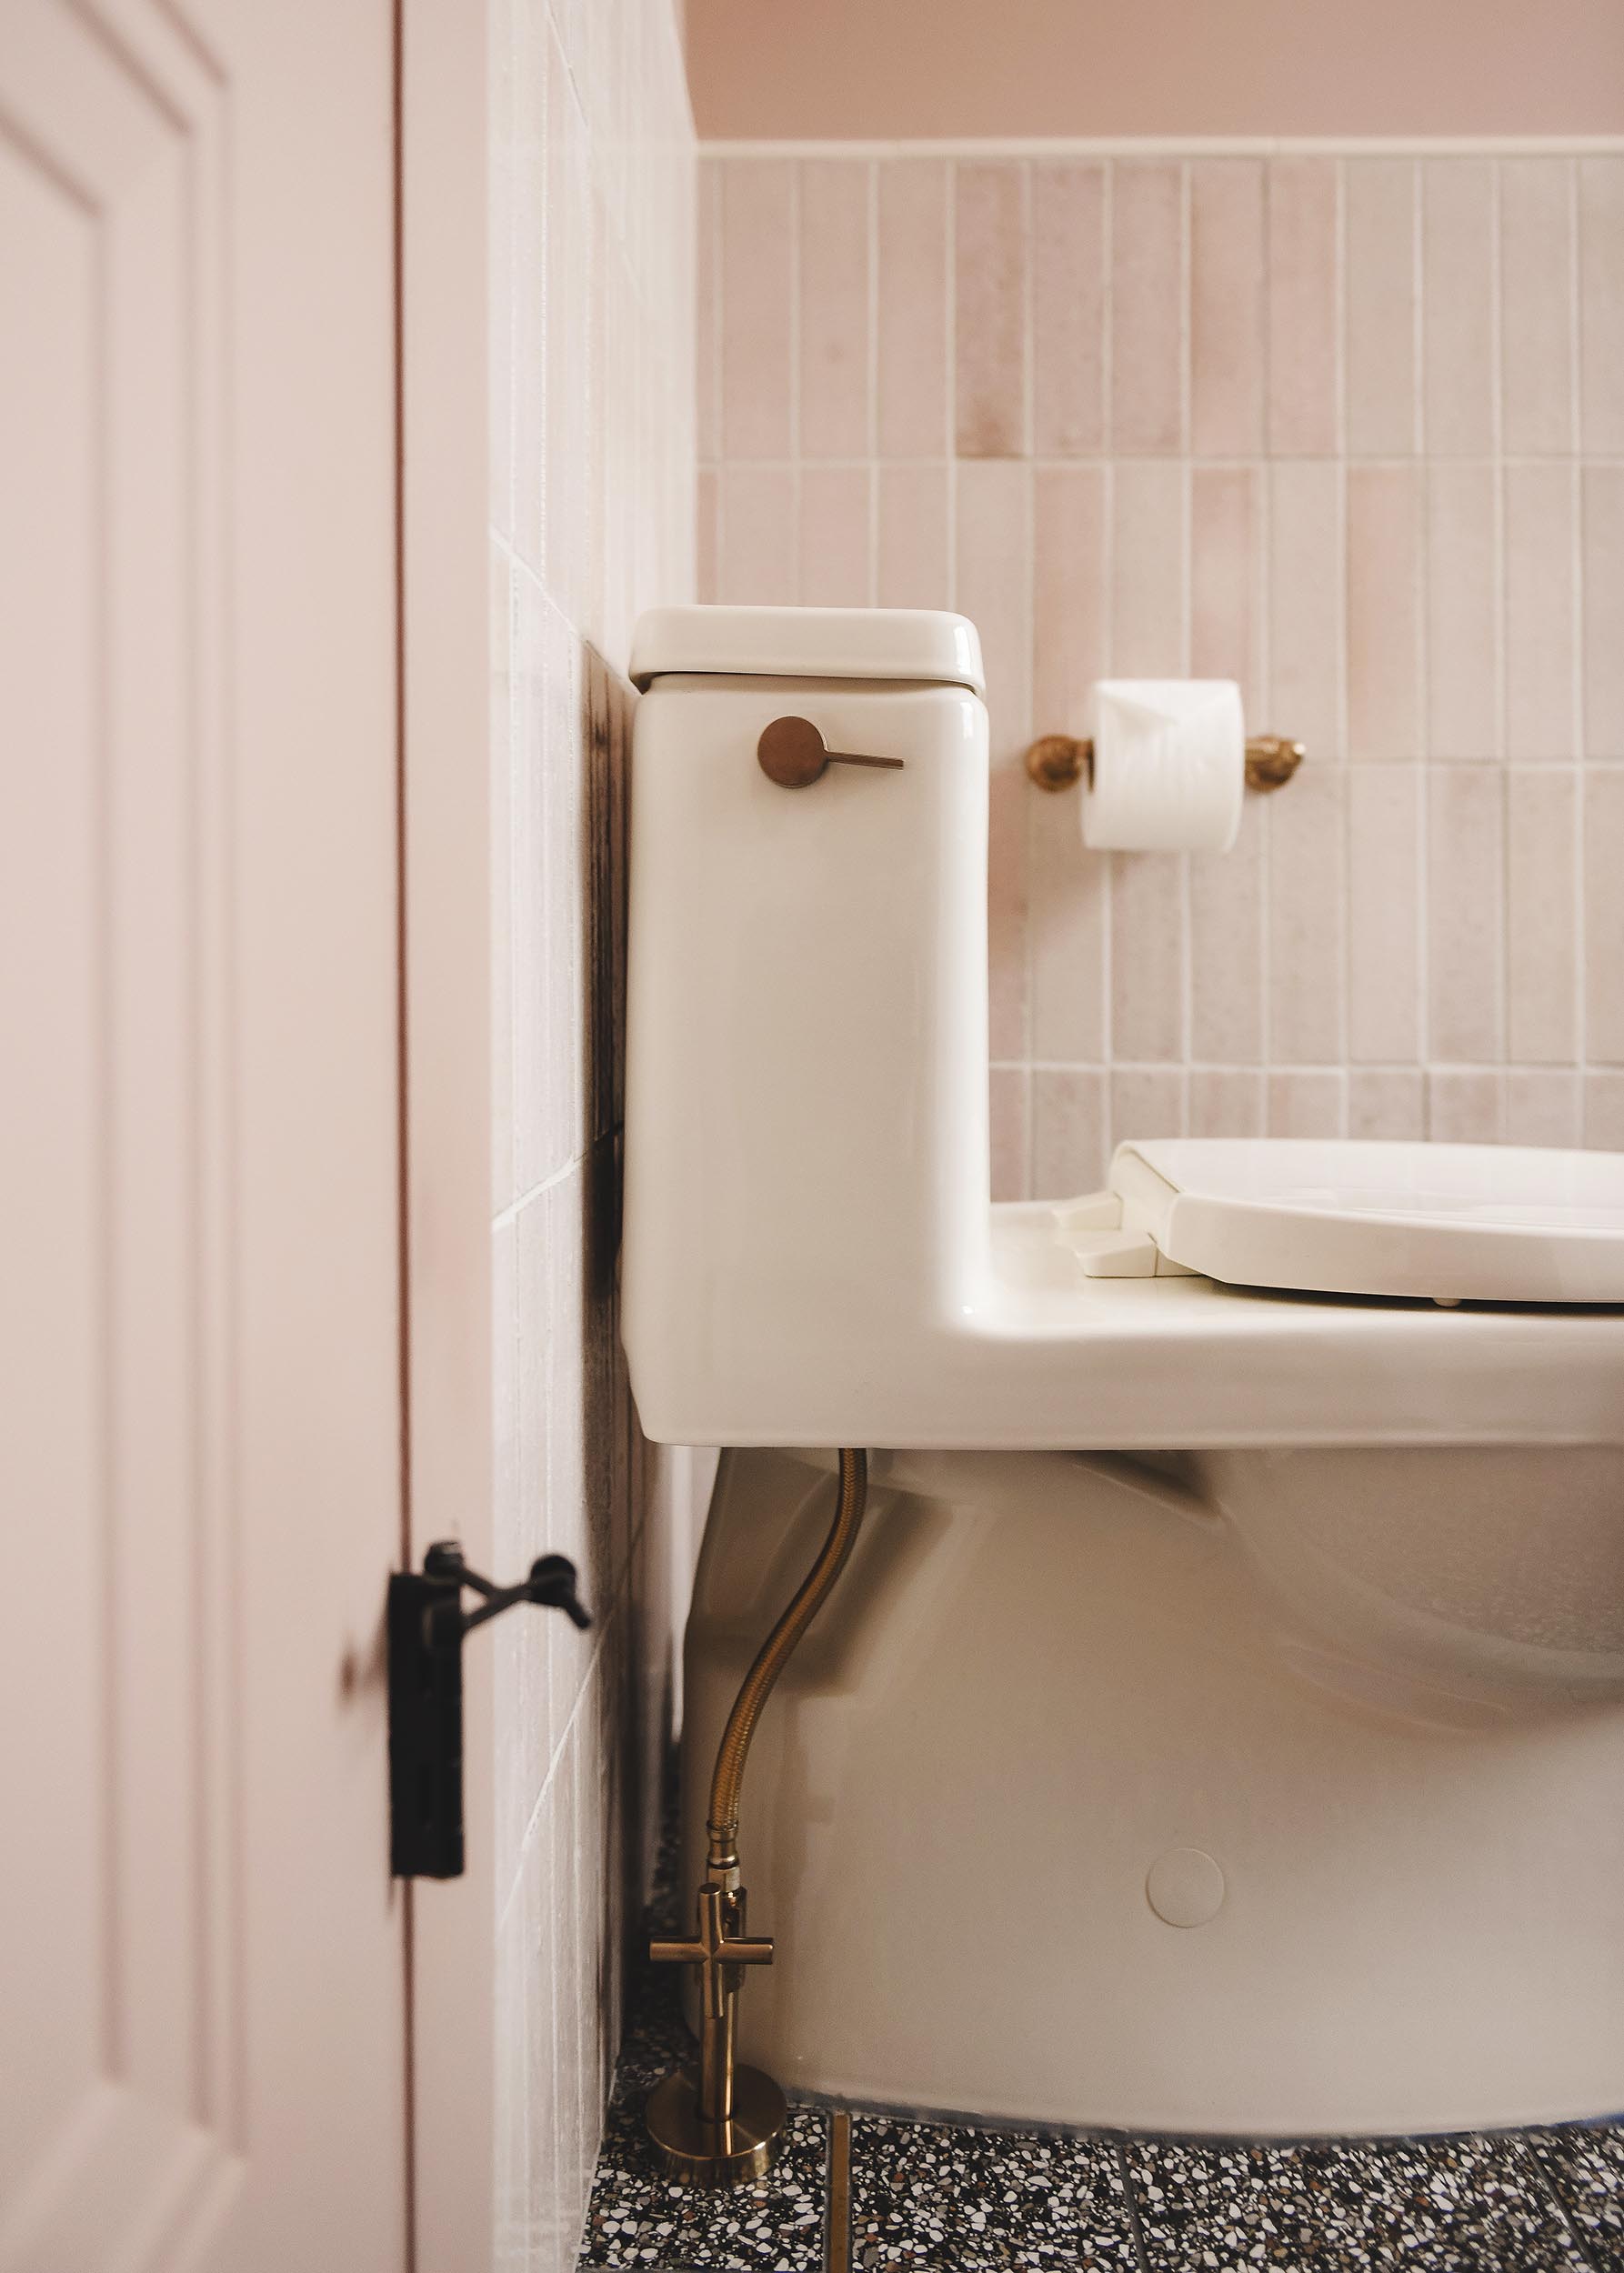 toilet detail showing brass handle | via Yellow Brick Home